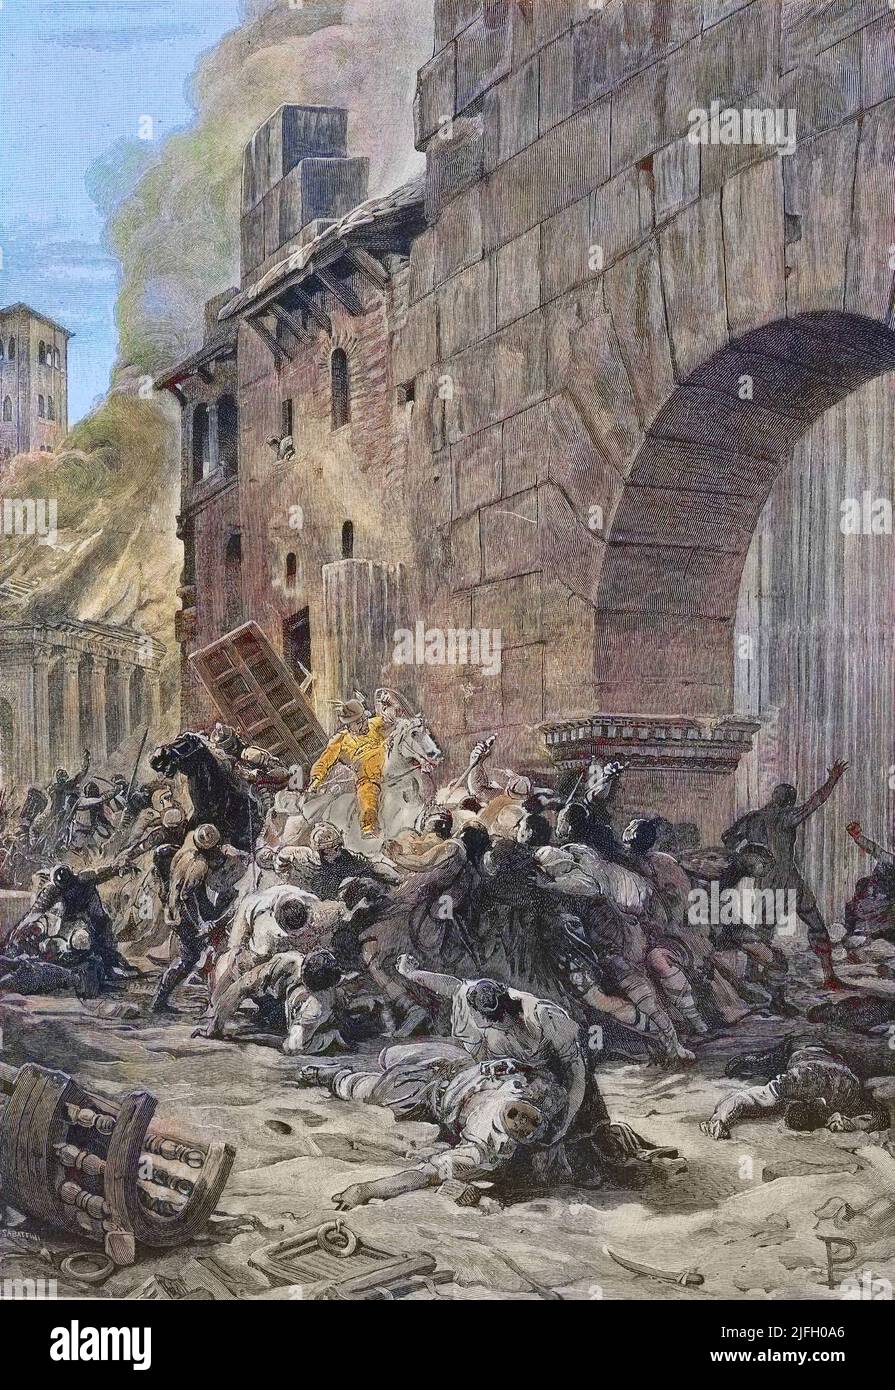 Sac de Rome de 1084 par les Normands de Robert Guiscard duc d'Apulie - The  Sack of Rome of May 1084 was a Norman sack, the result of the pope's call  for